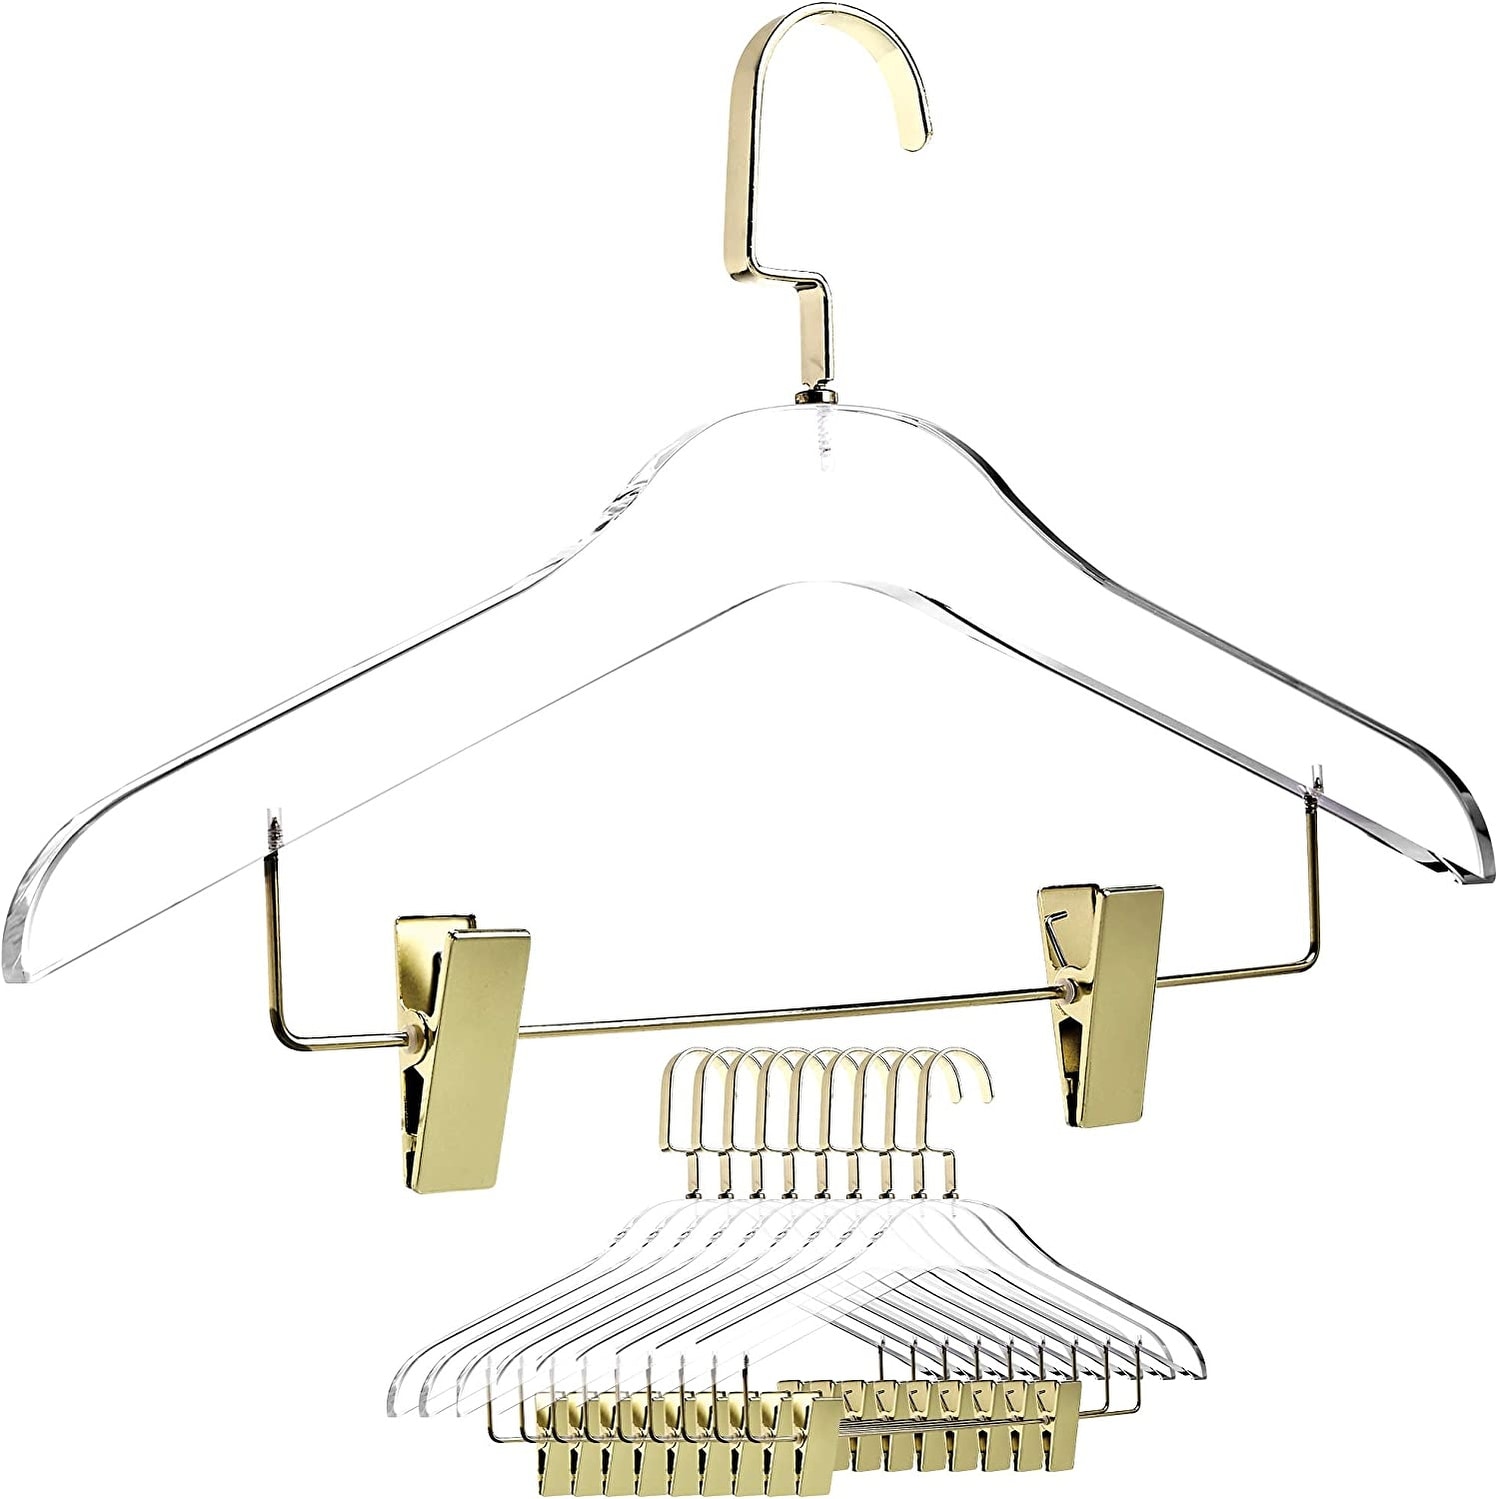 https://ak1.ostkcdn.com/images/products/is/images/direct/6ae4f1ce3a2b6d75d44623db366e6a92a6cf0d94/DesignStyles-Clear-Acrylic-Clothes-Hangers-w-Hanging-Clips---10-Pk.jpg